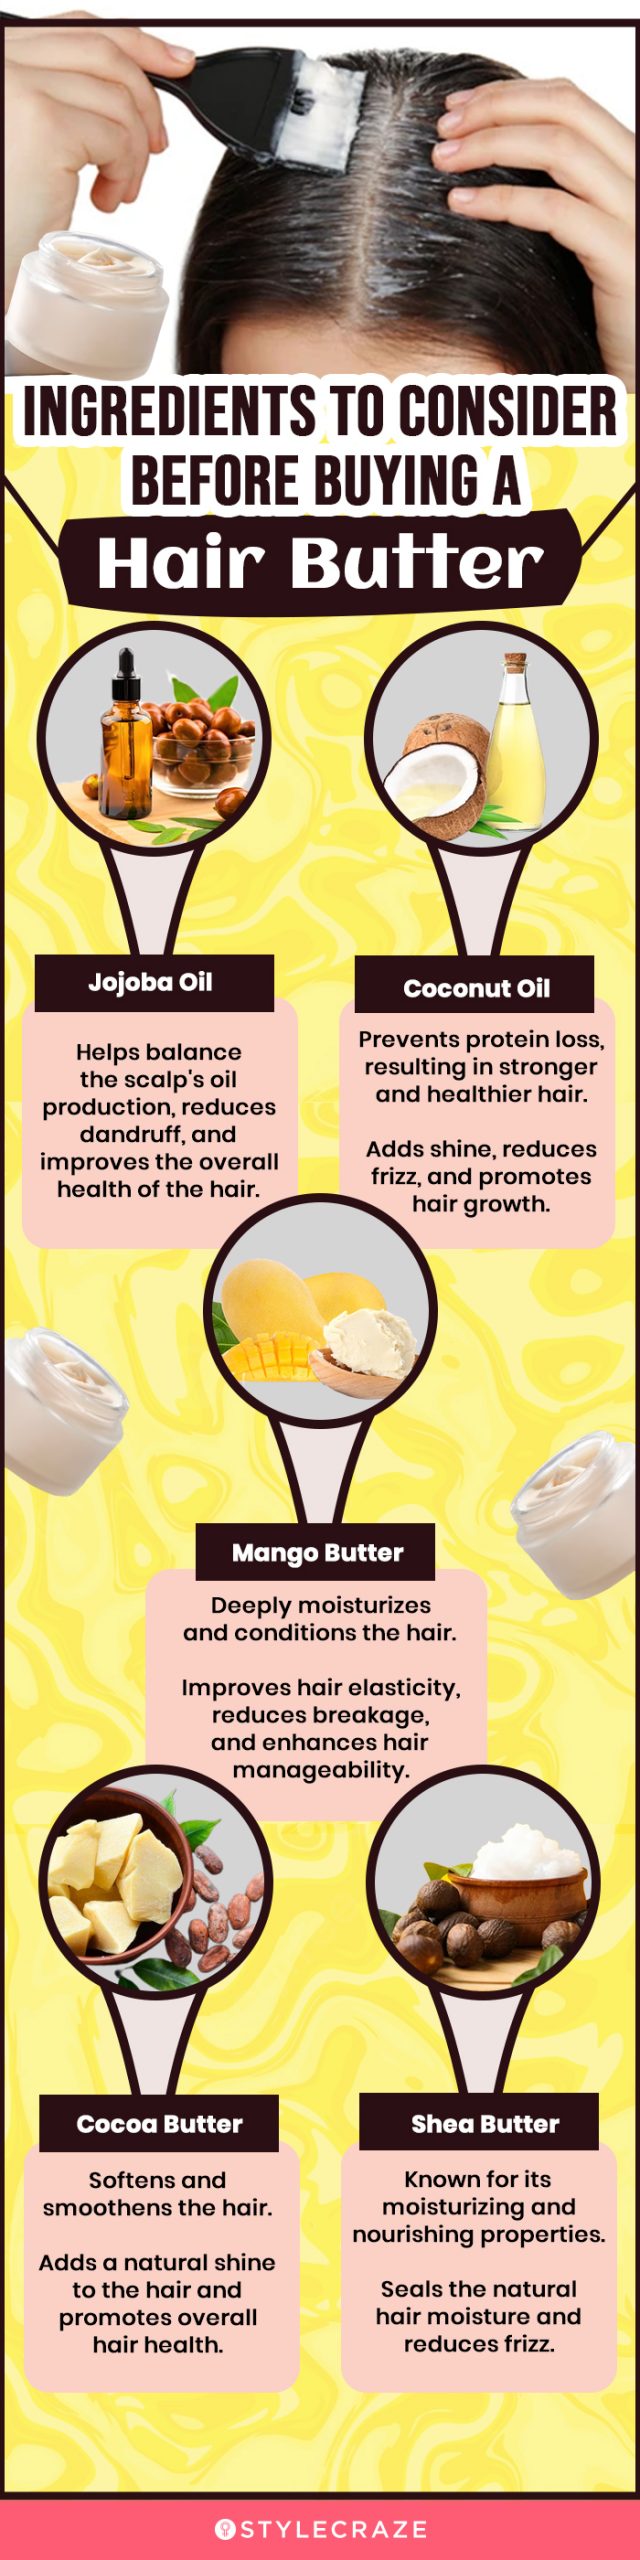 Ingredients To Consider Before Buying A Hair Butter (infographic)